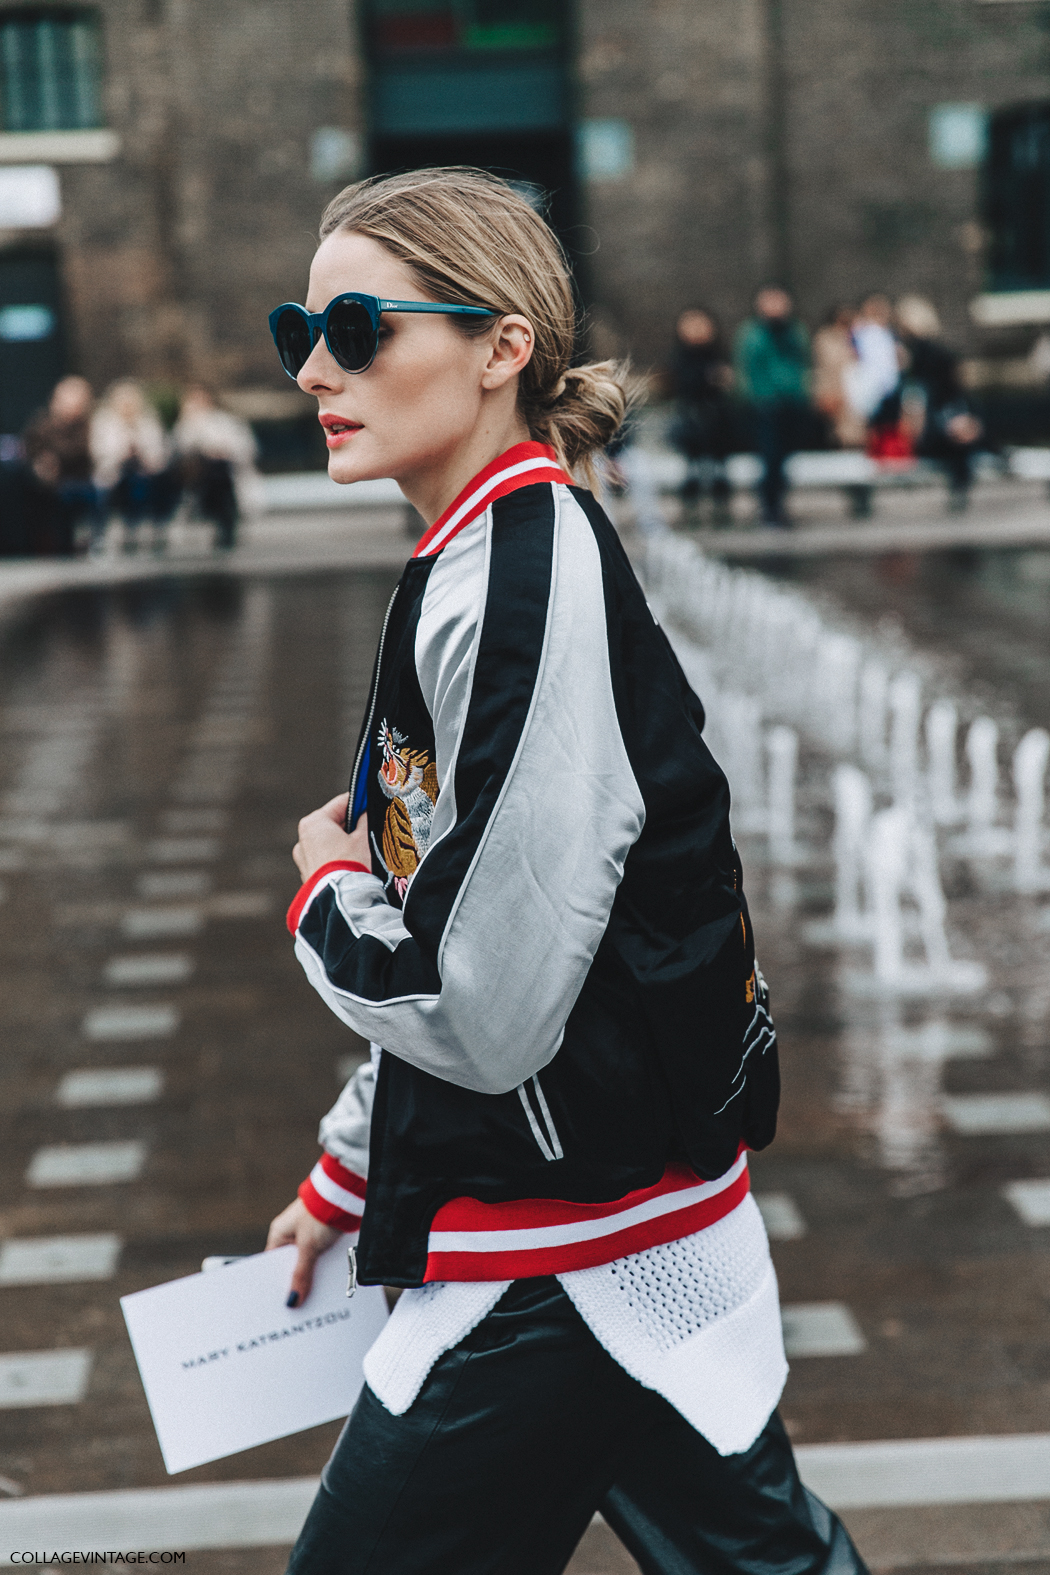 LFW-London_Fashion_Week_Fall_16-Street_Style-Collage_Vintage-Olivia_Palermo-Bomber_Jacket-Leather_Trousers-Red_Shoes-11